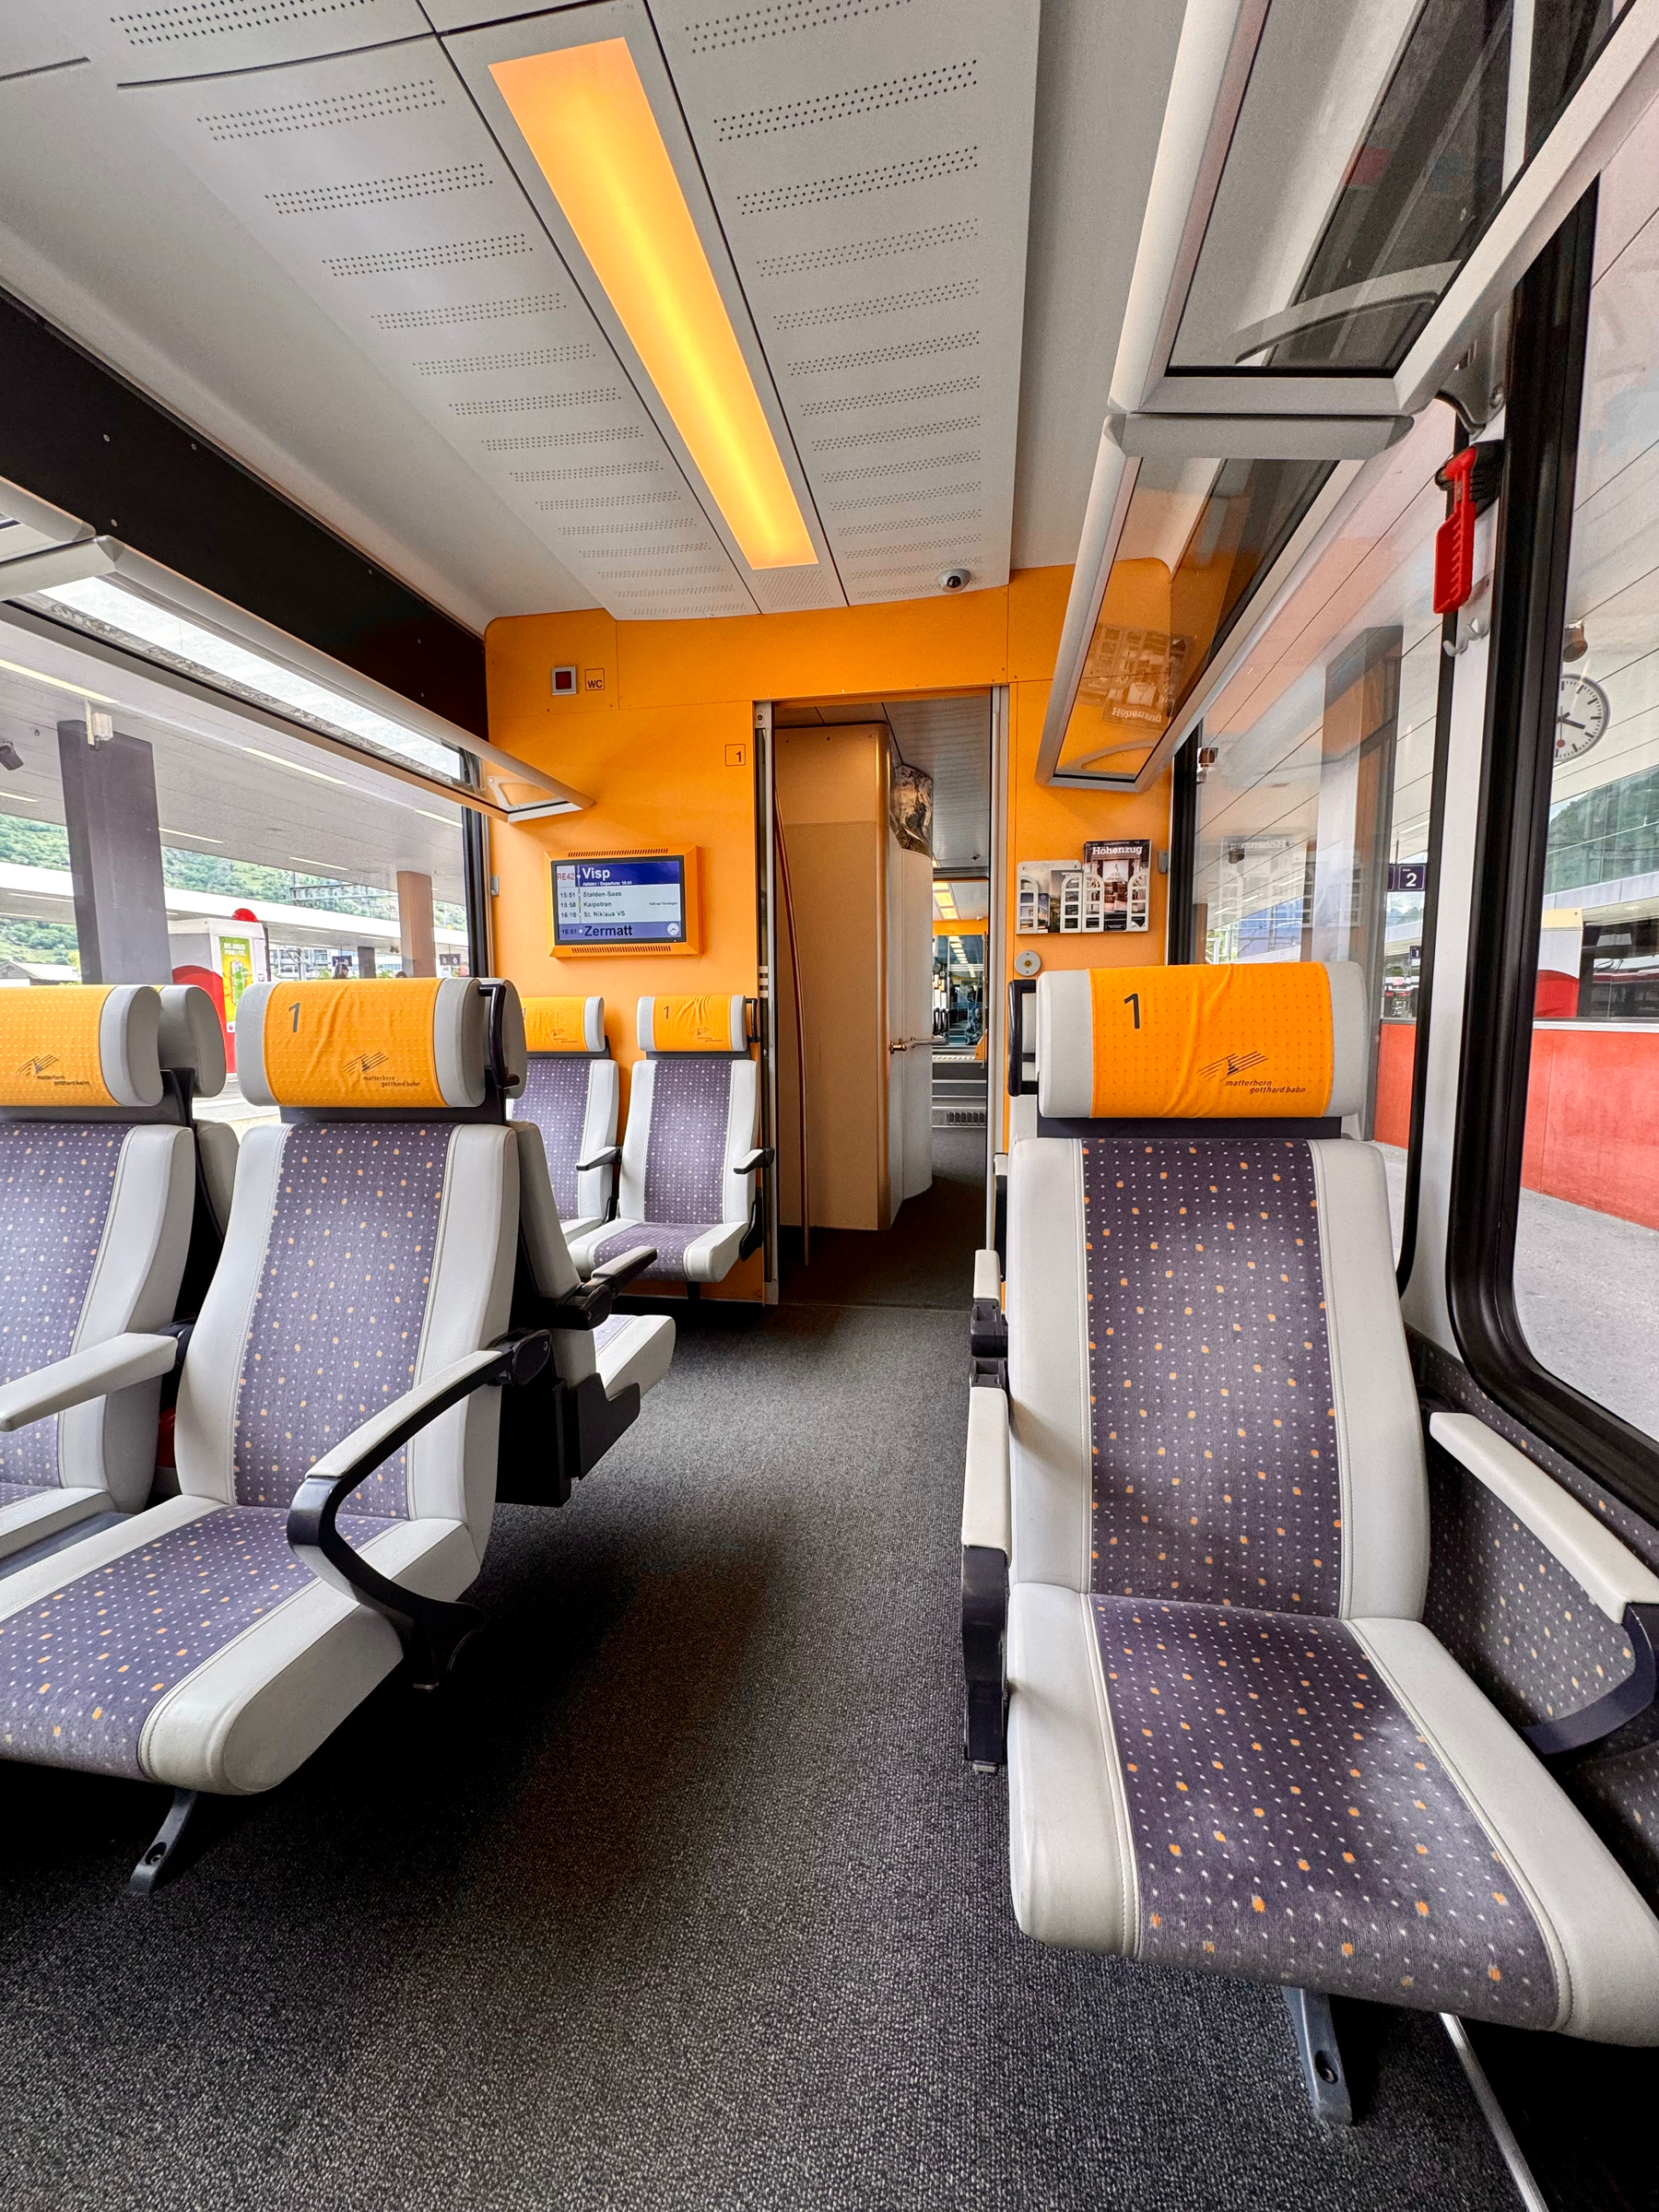 Interior of a modern train carriage with empty seats and large windows, featuring a bright orange and white color scheme.